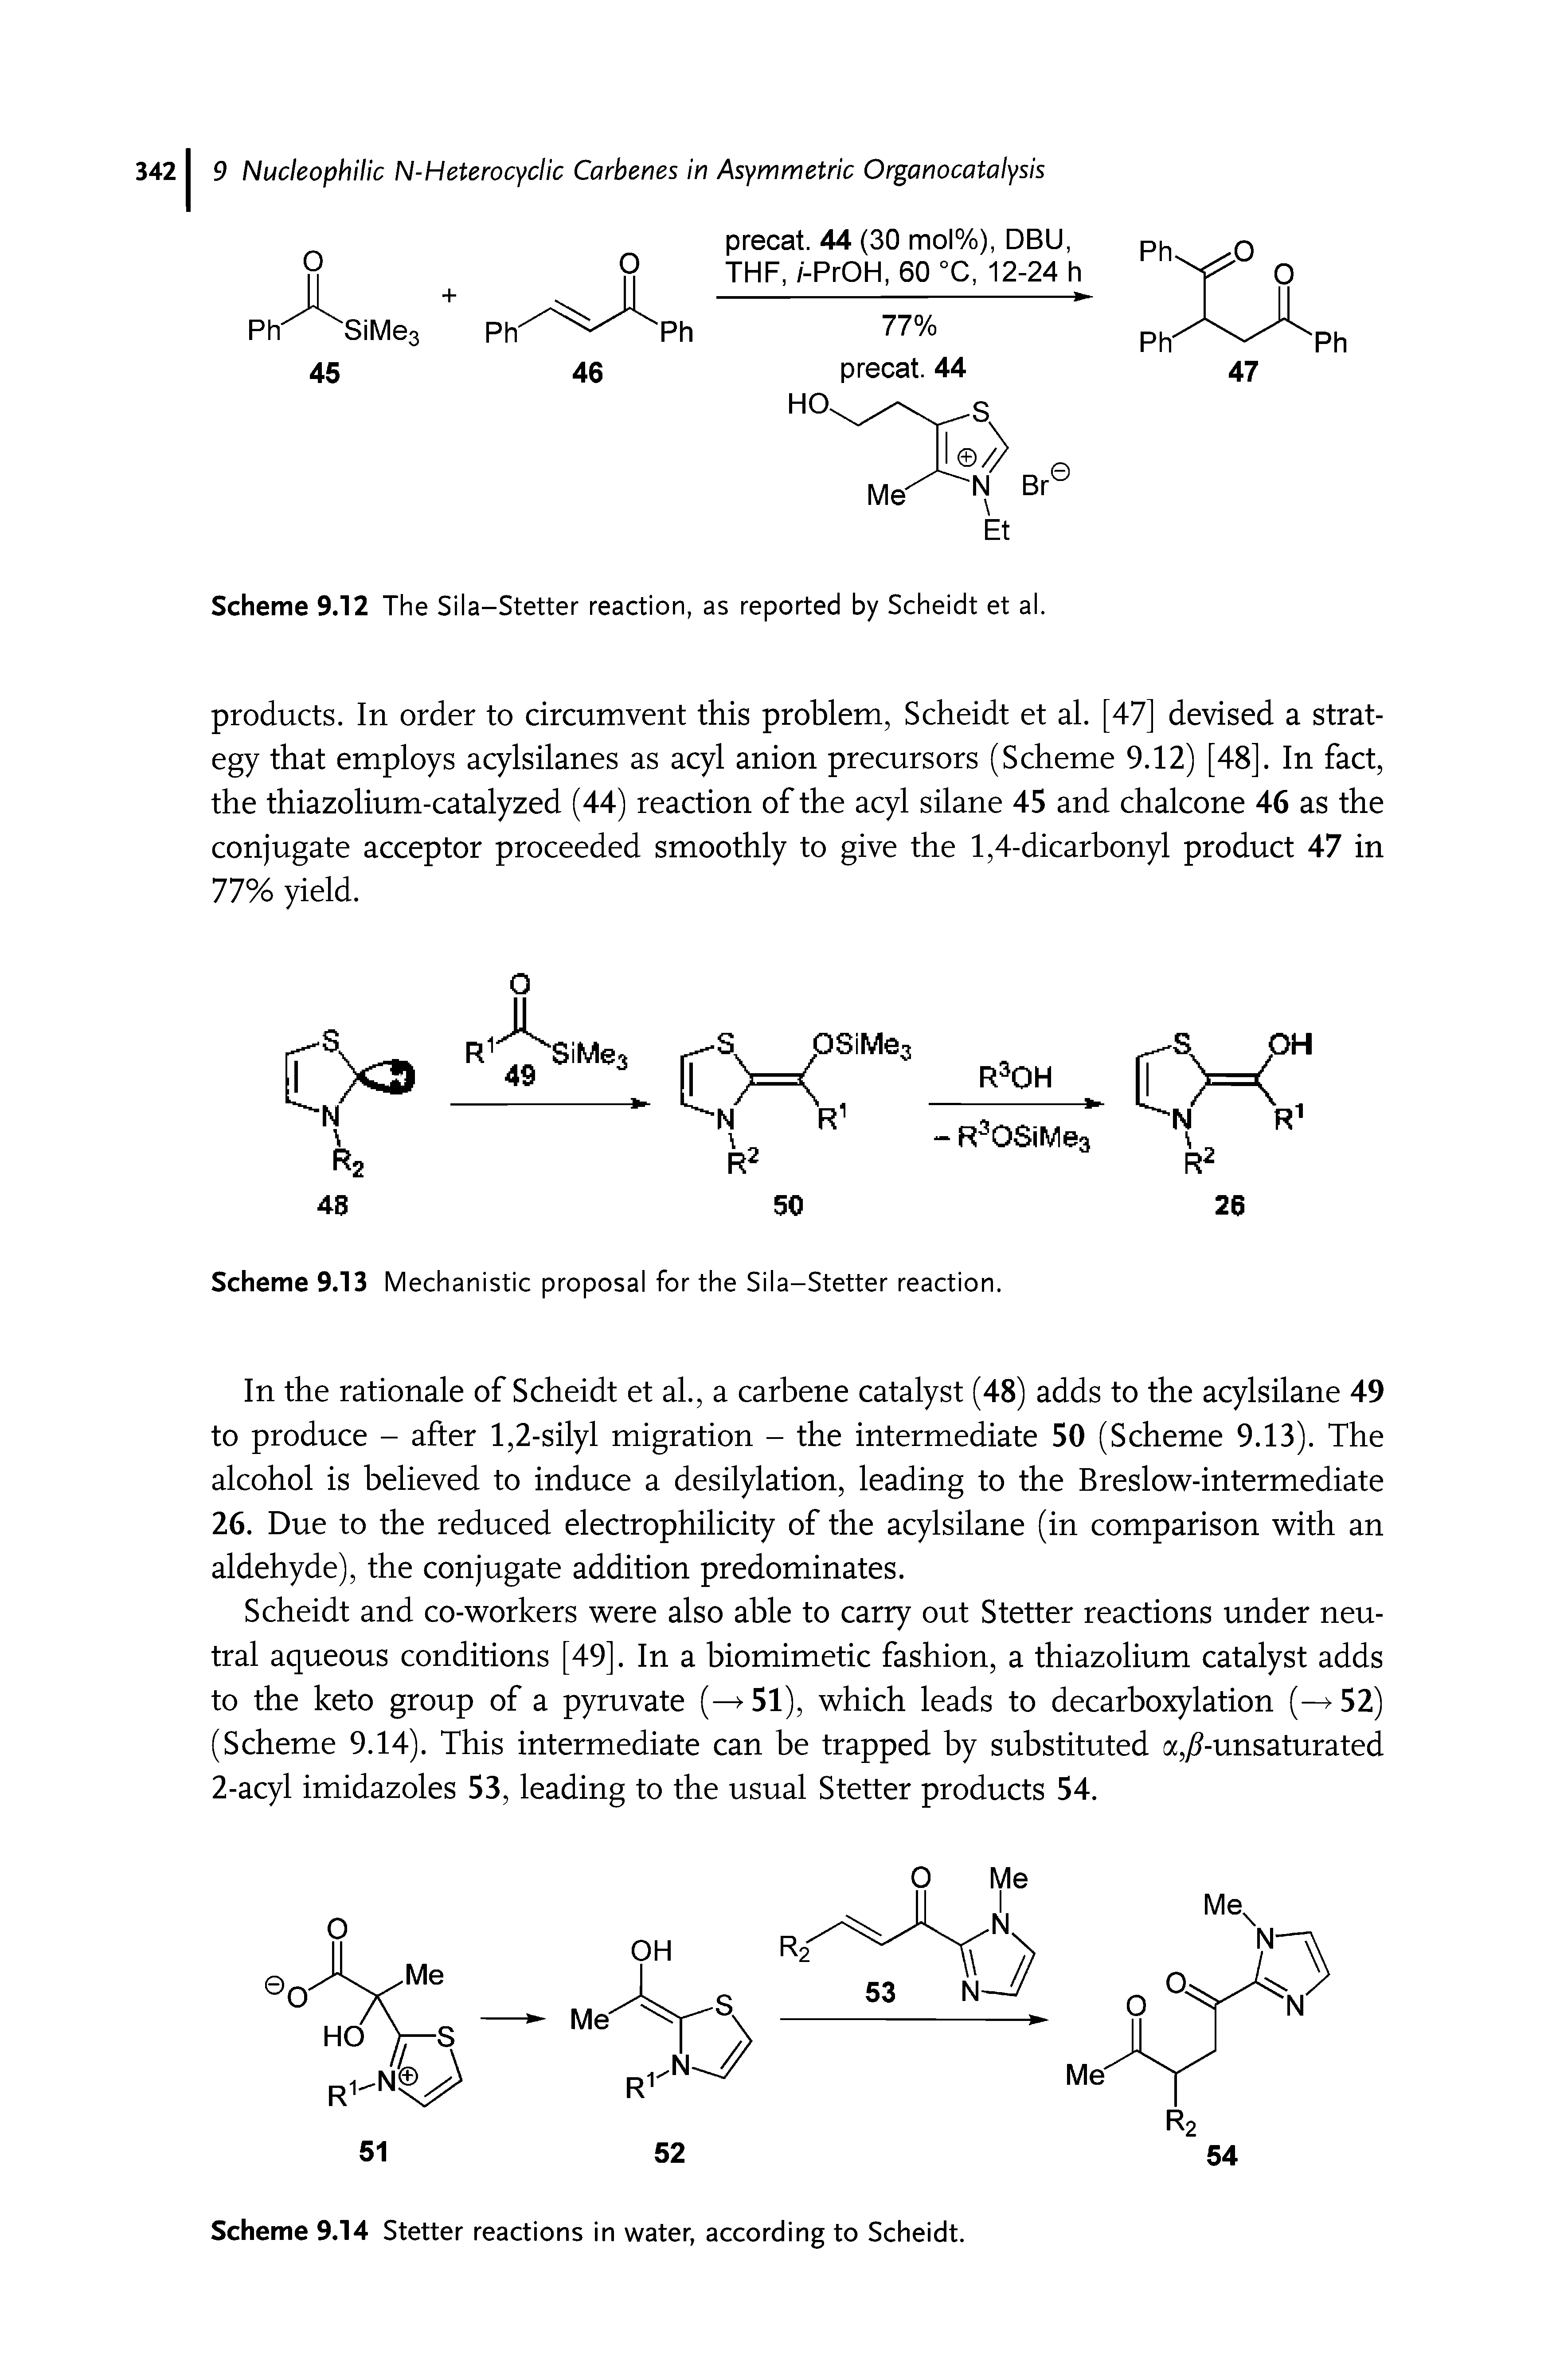 Scheme 9.12 The Sila-Stetter reaction, as reported by Scheidt et al.